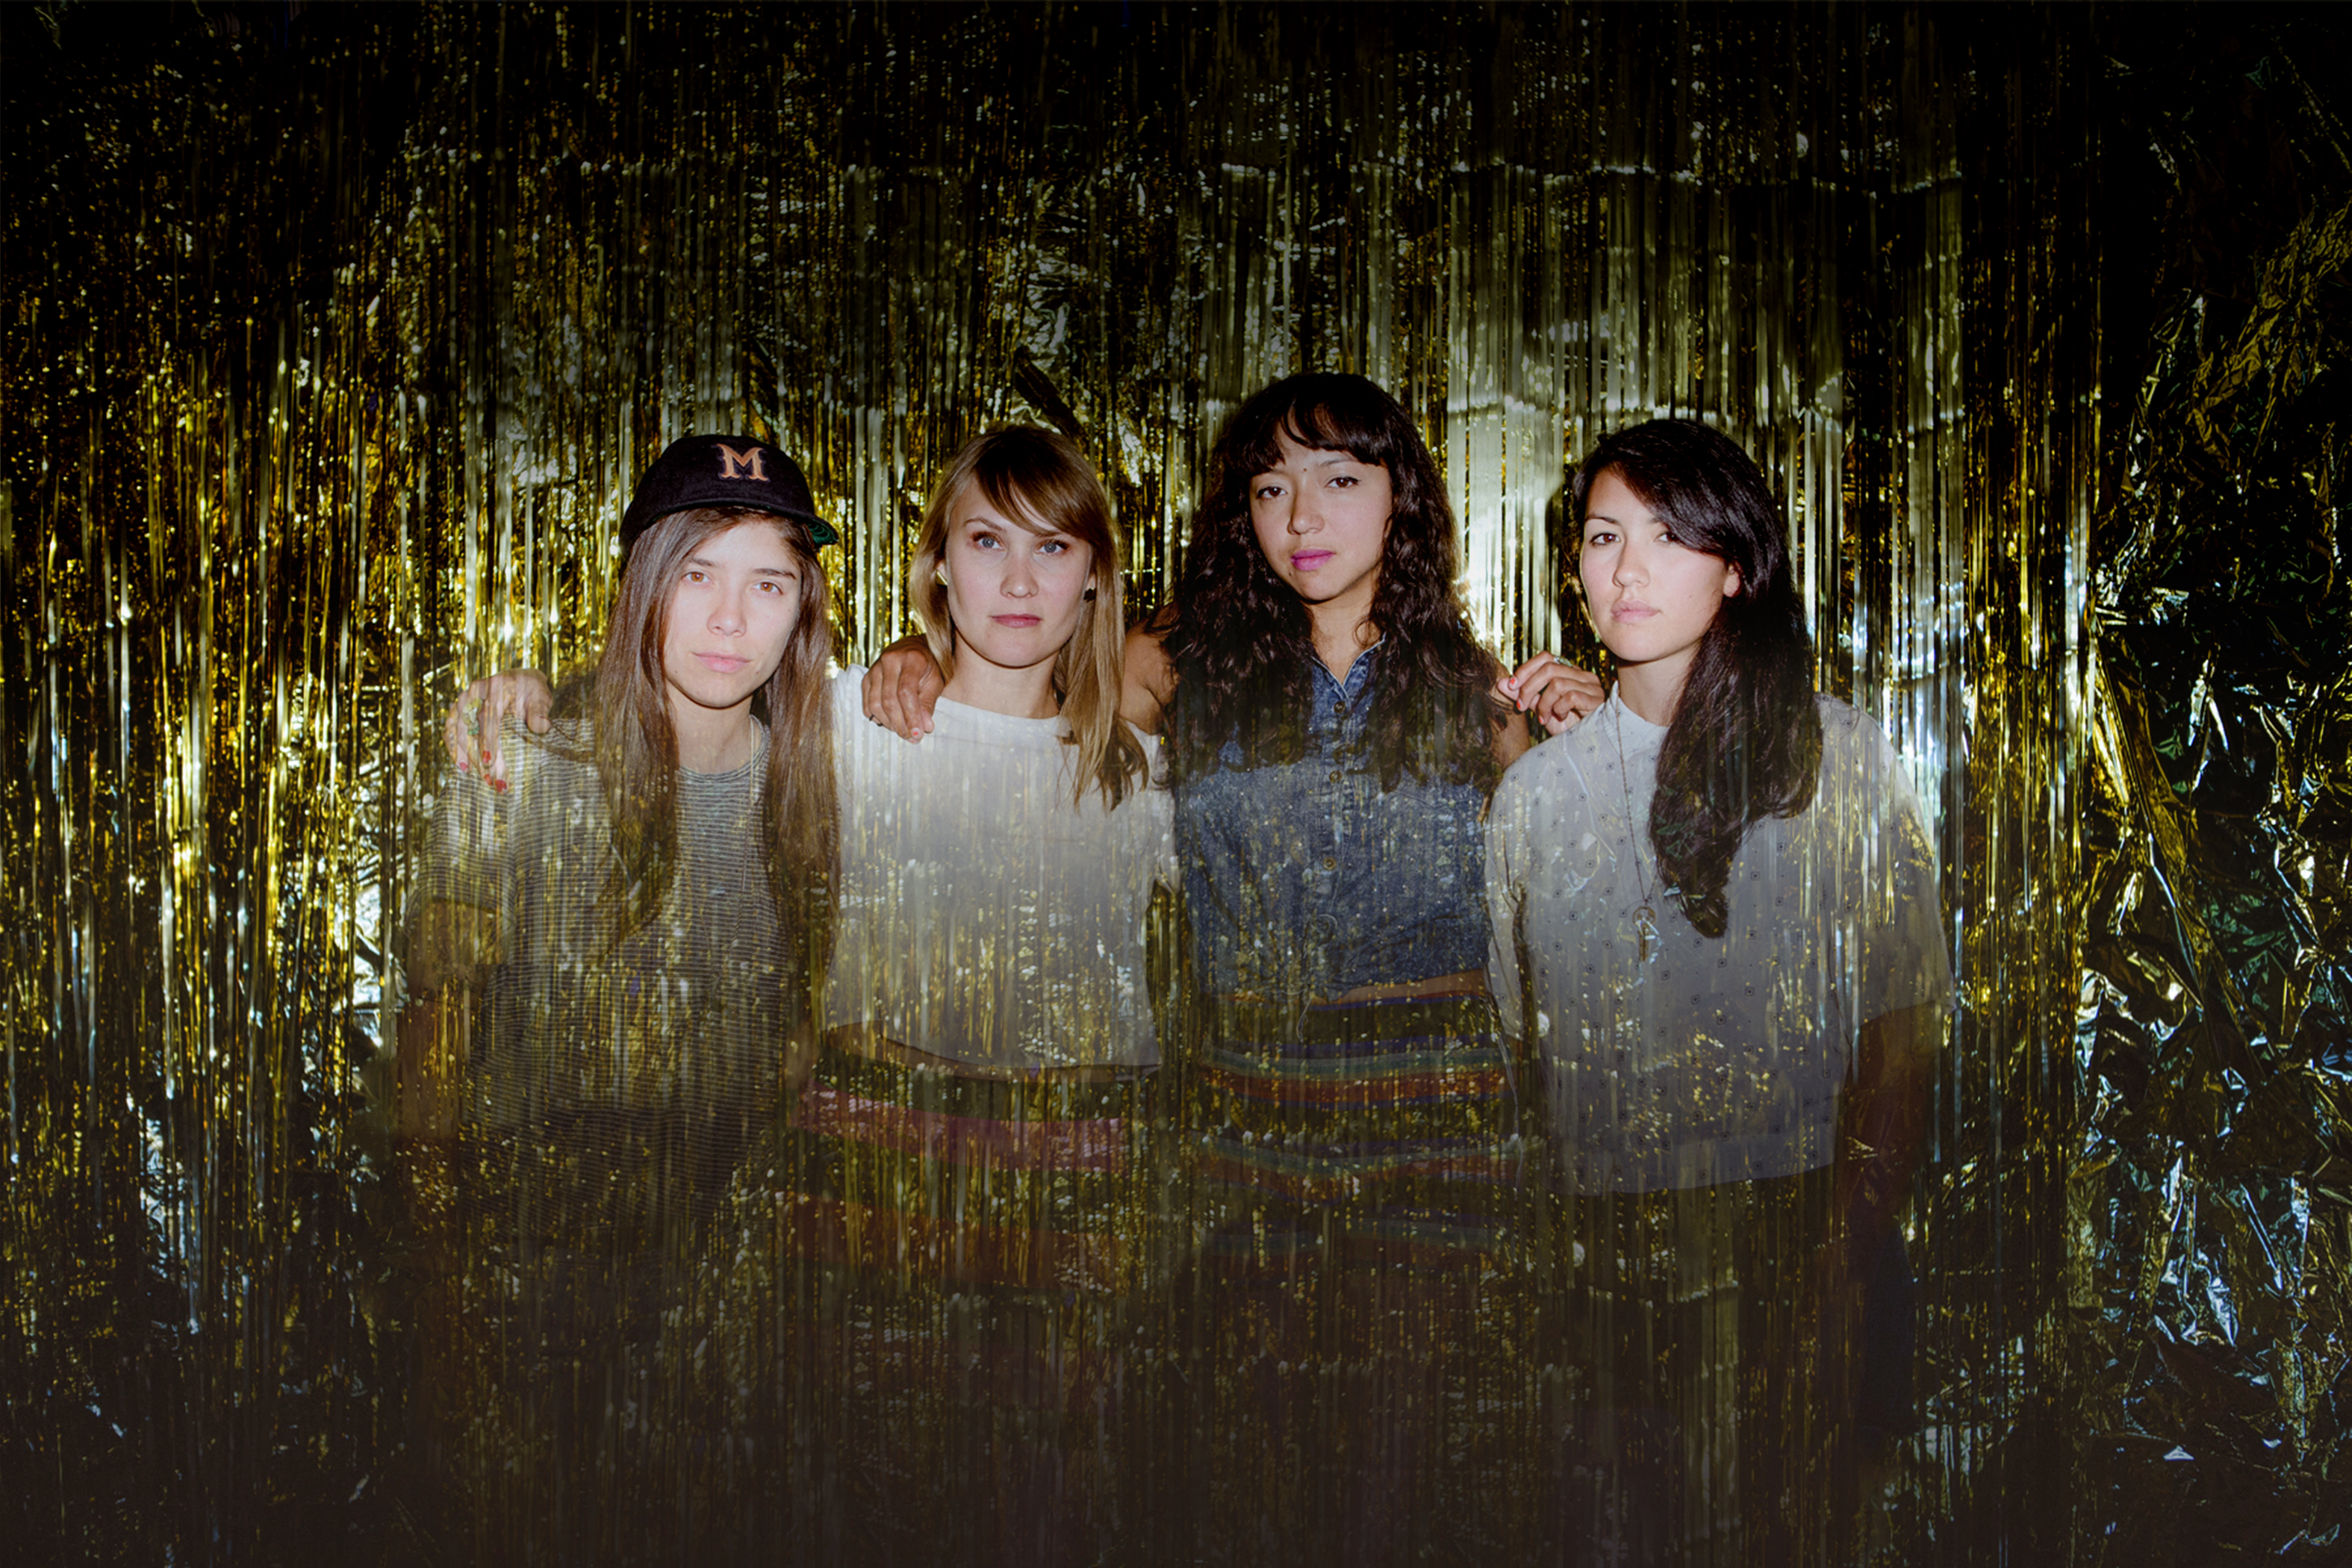 At first, the four members of La Luz were afraid to tell